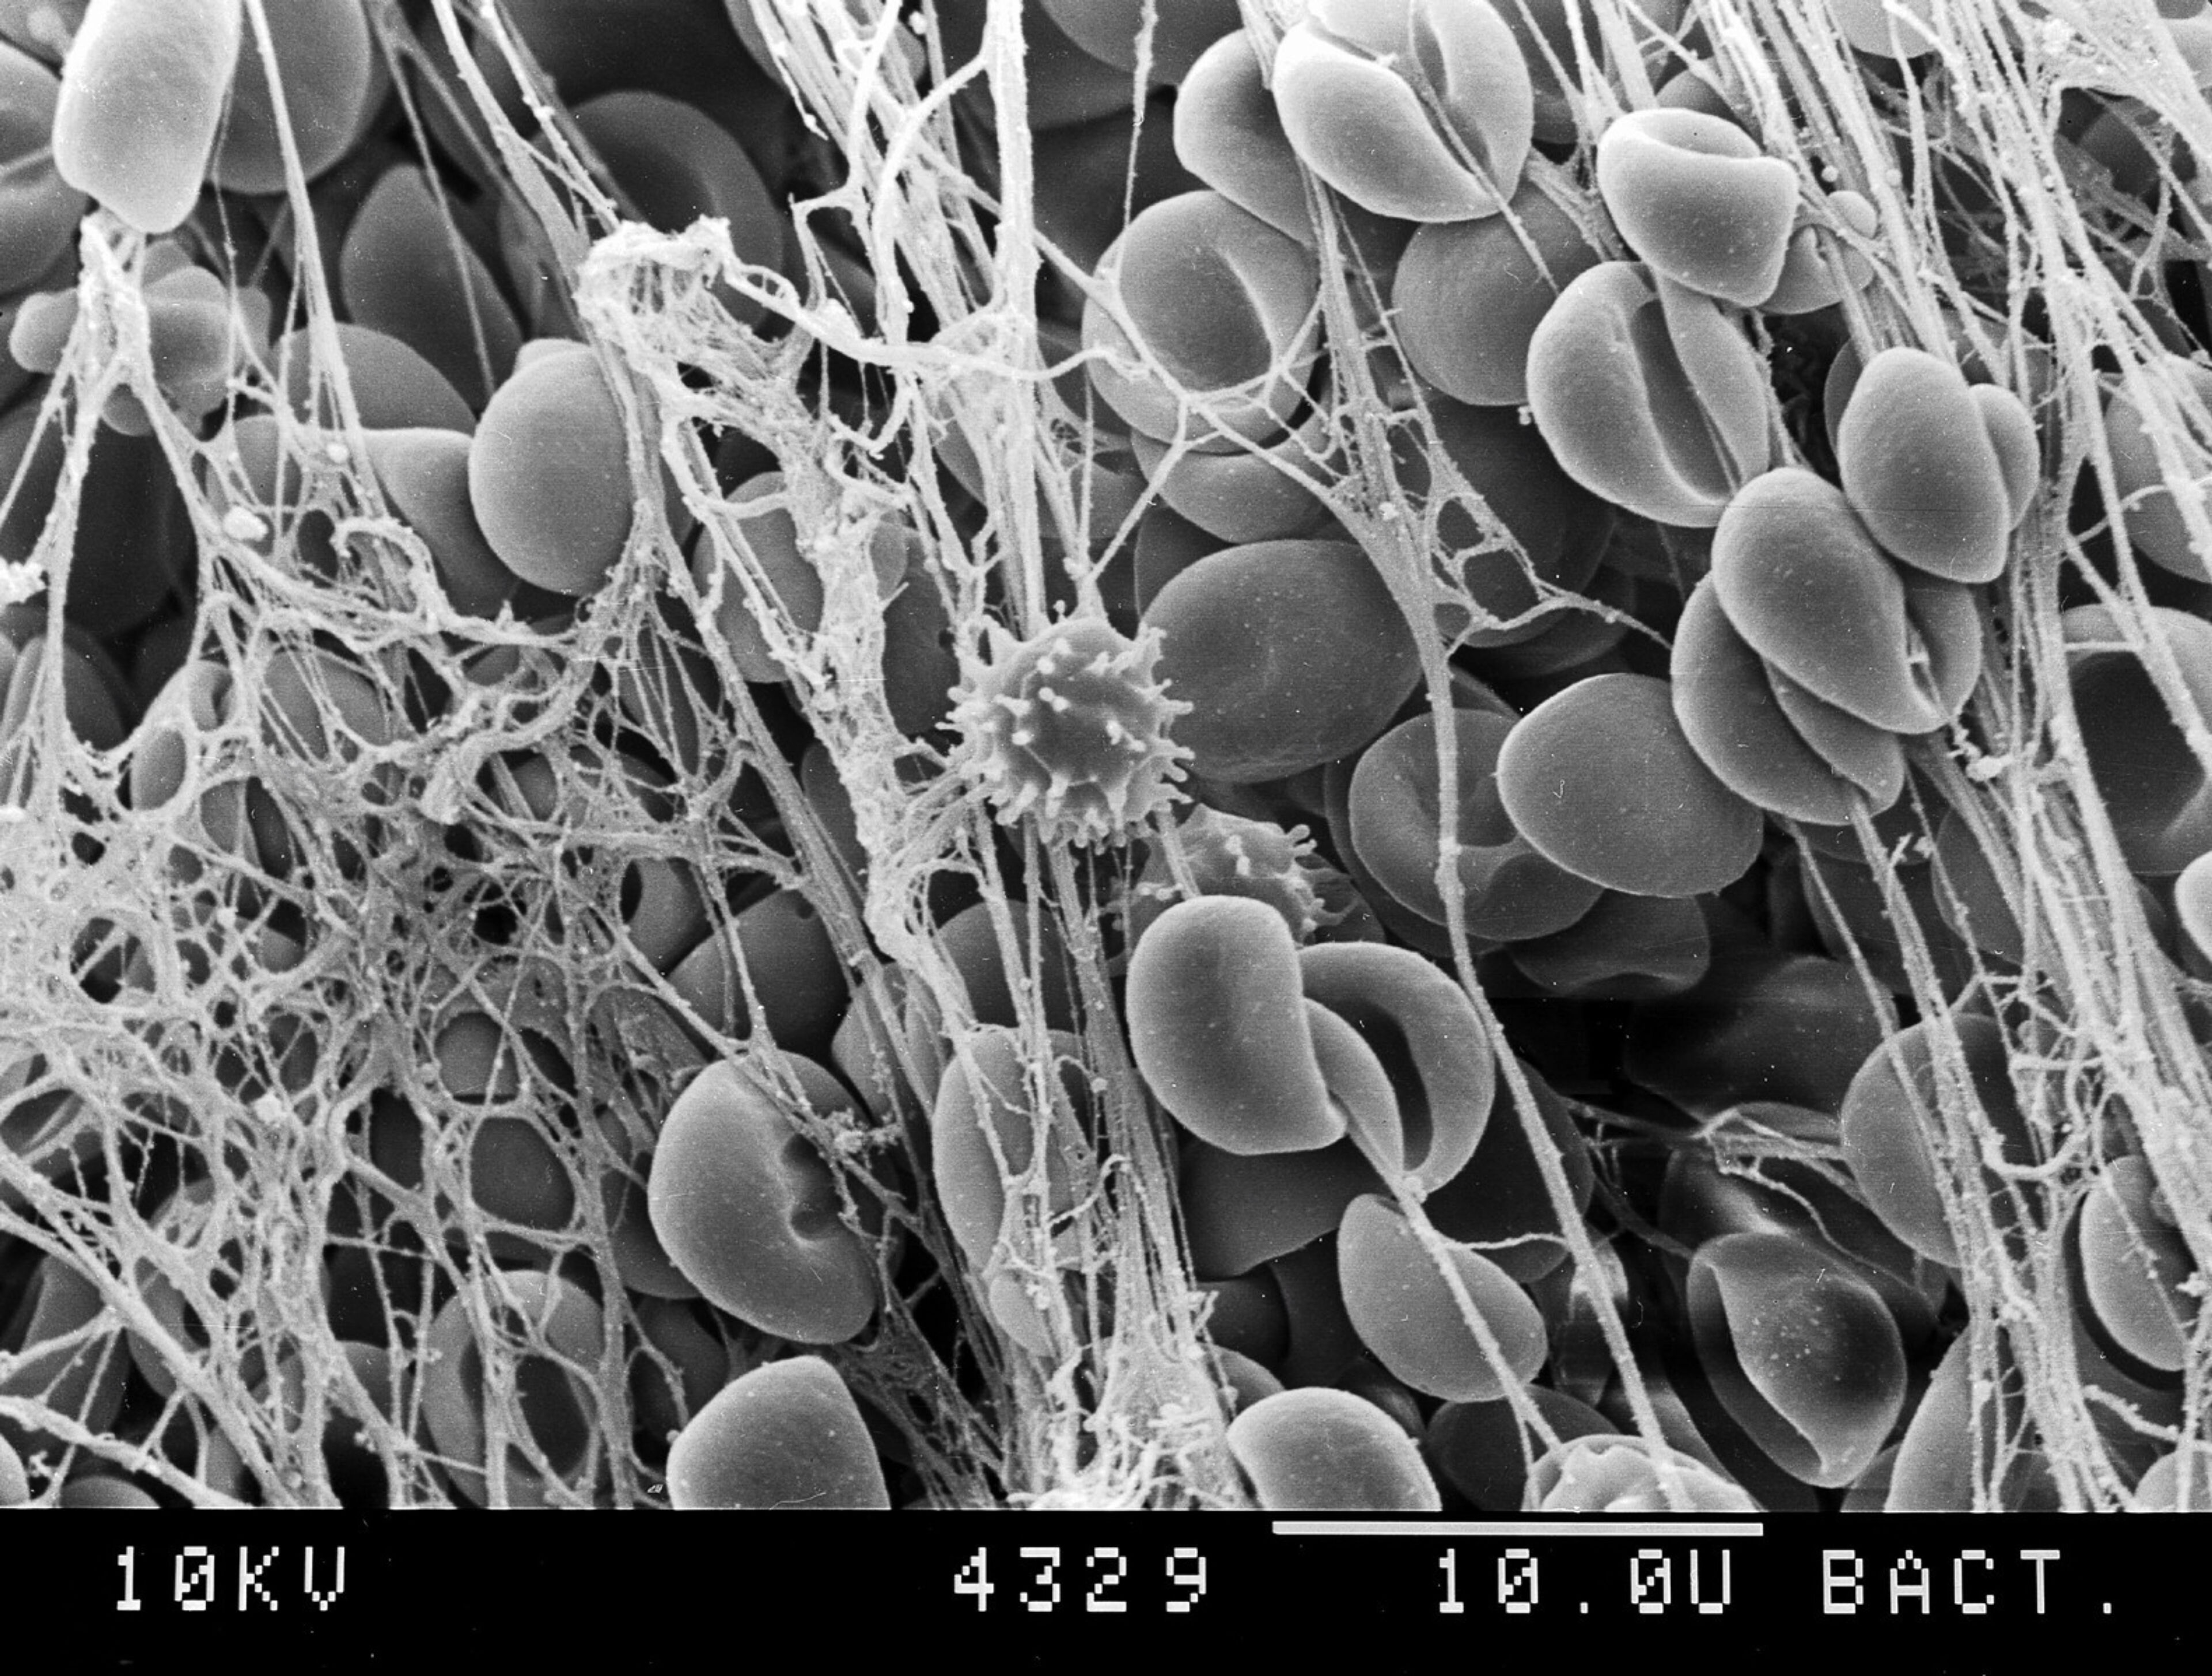 Electron micrograph of blood clot,high power